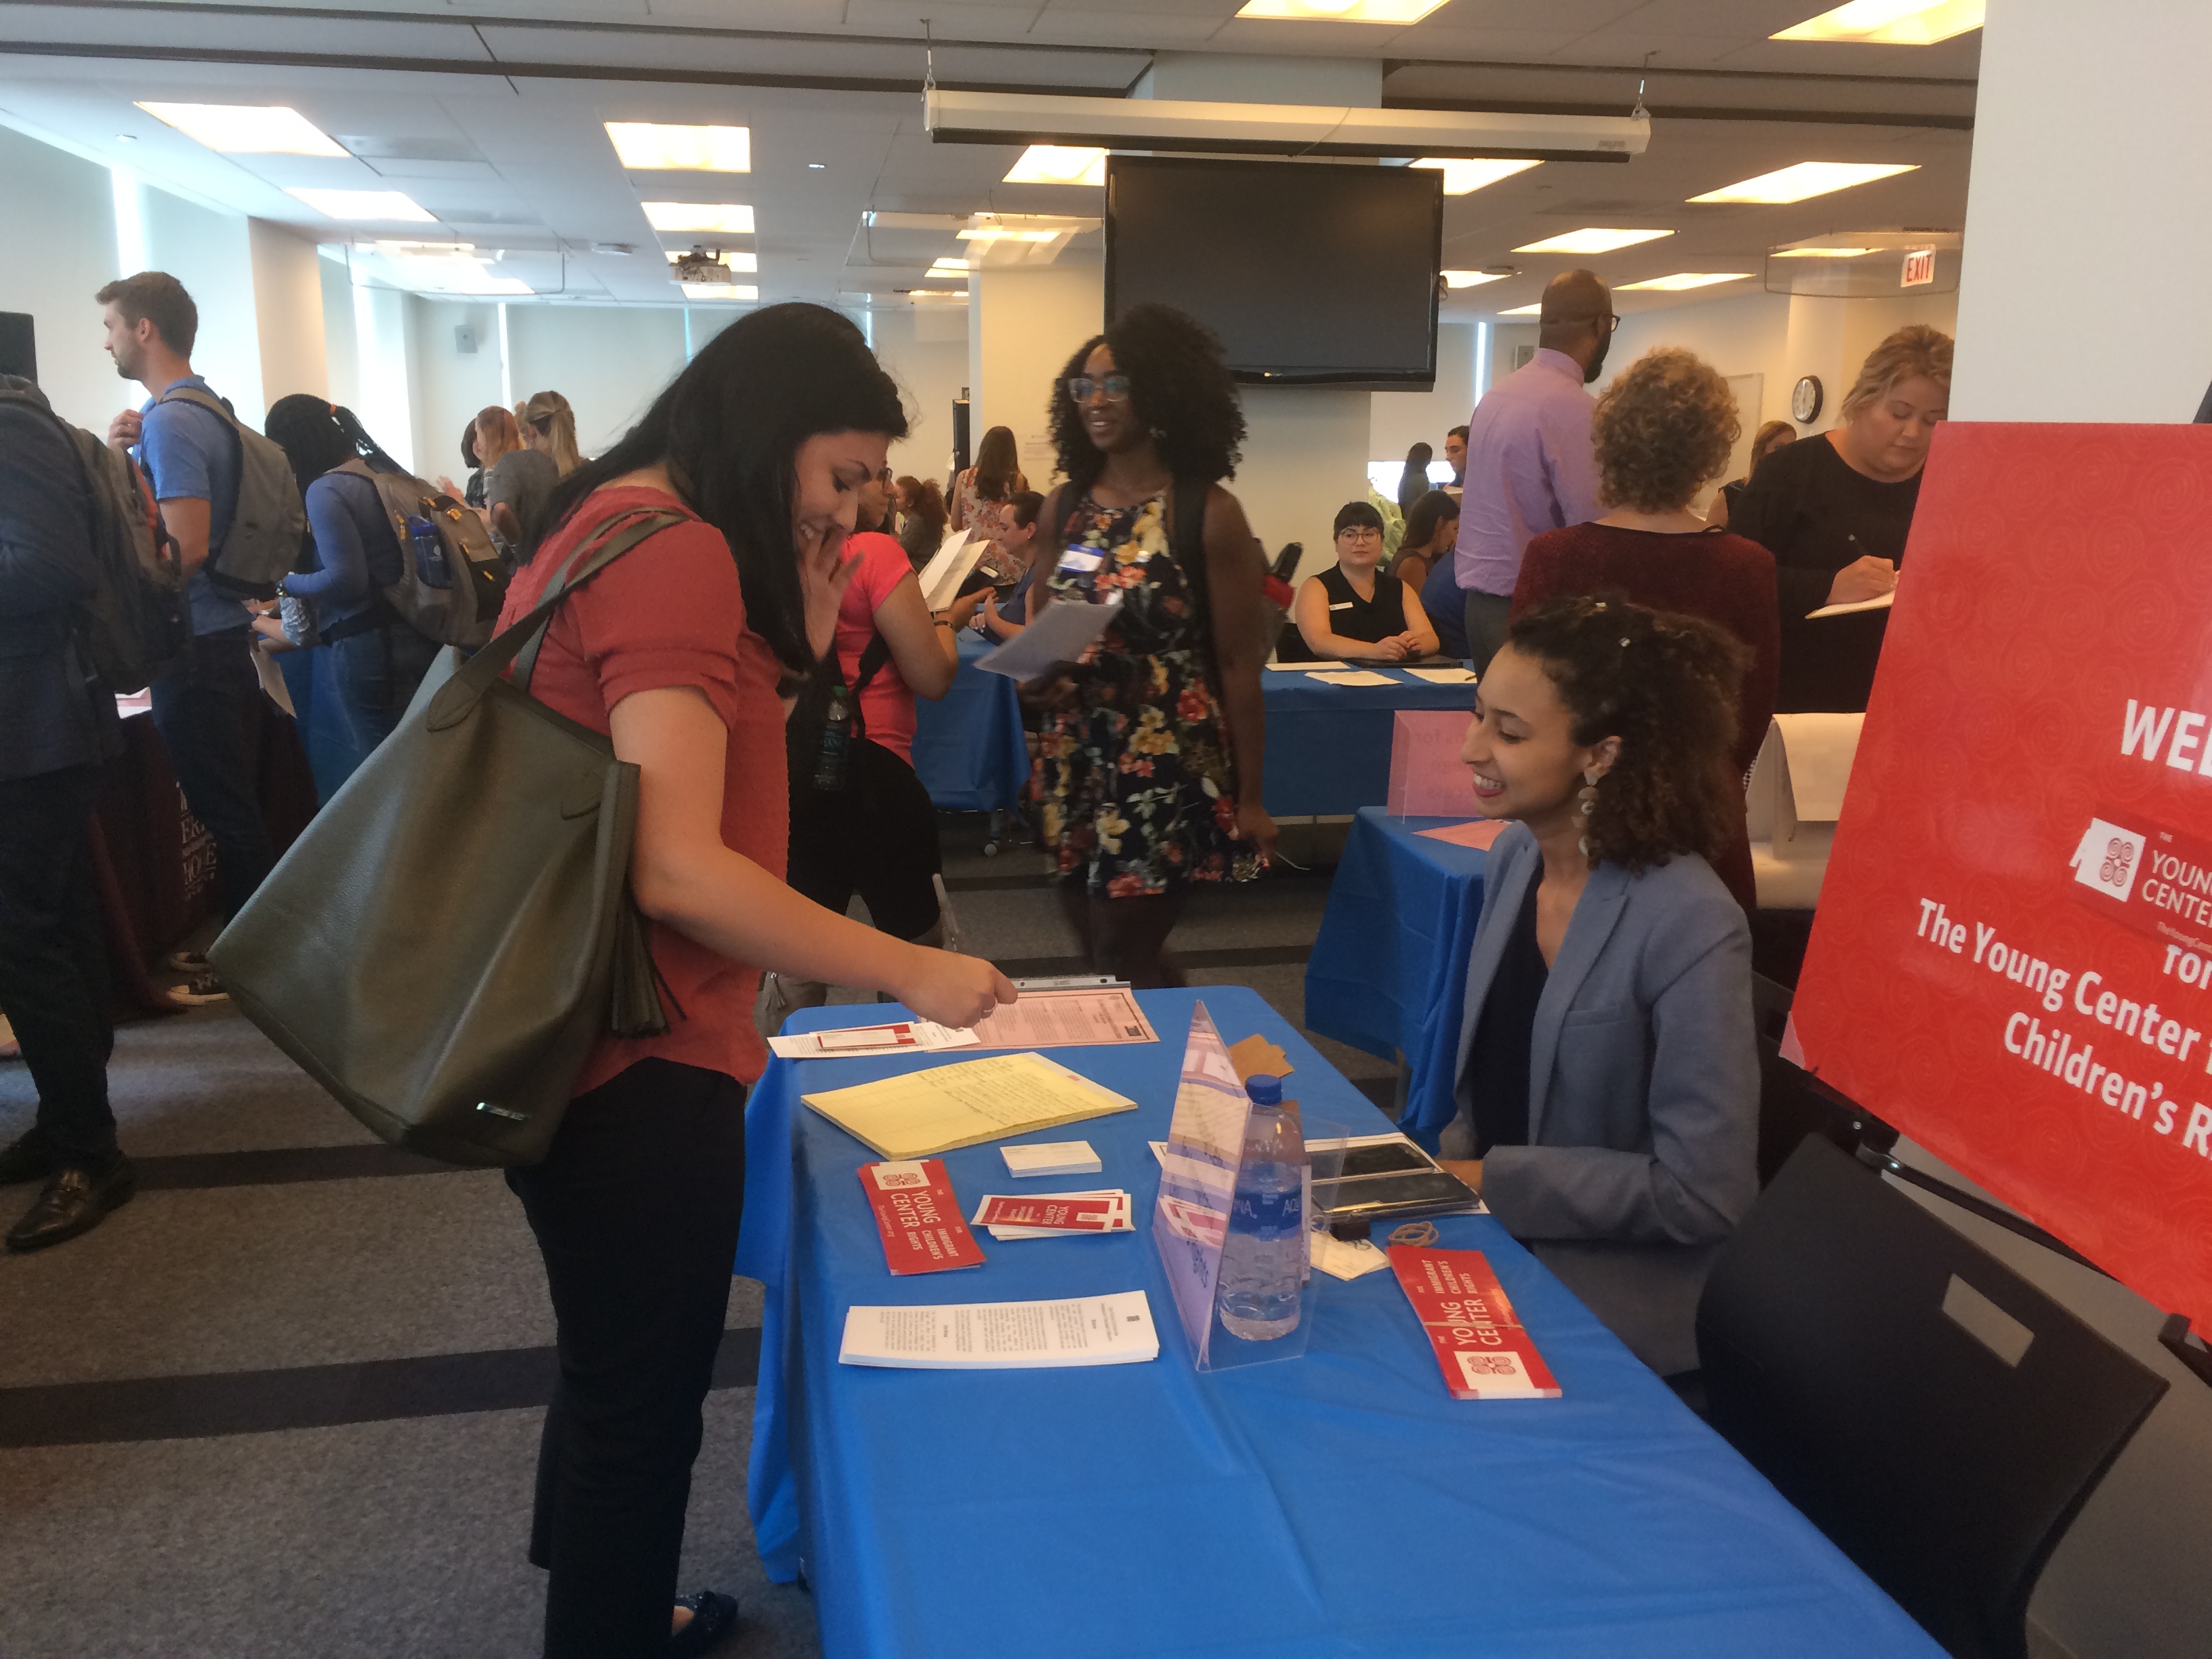  - The 2018 Job &amp; Volunteer Fair. Our partner site, the Young Center for Immigrant Children&#39;s Rights, recruiting students to serve at their site for the coming year.